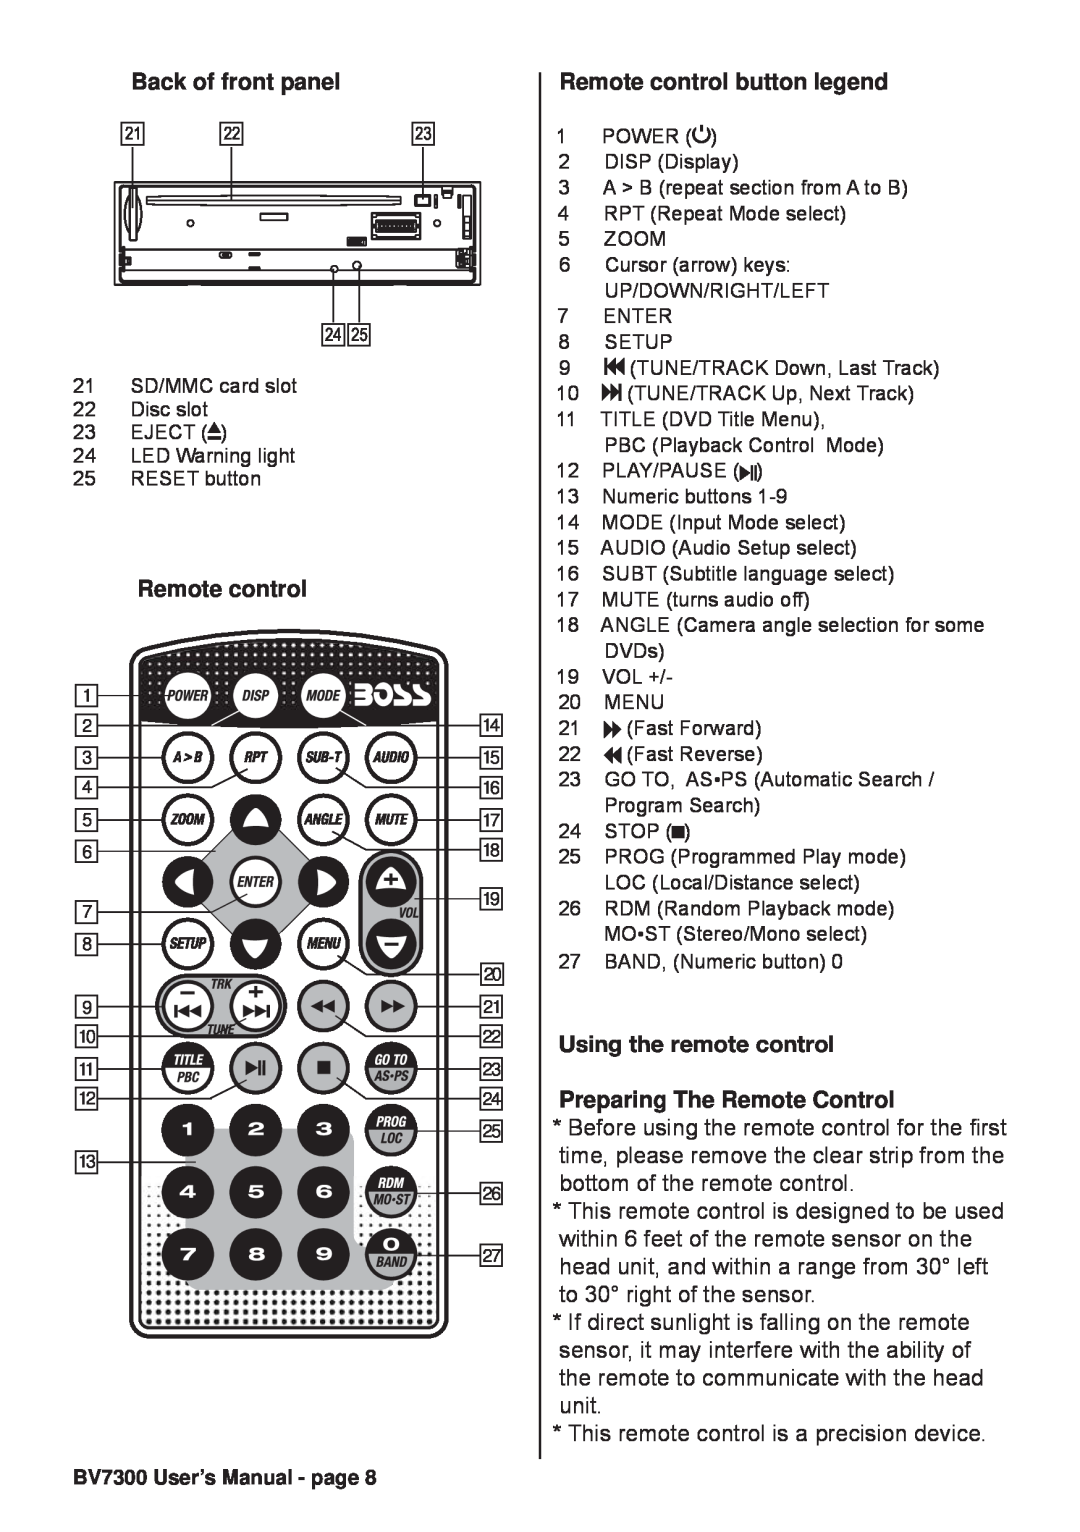 Boss Audio Systems BV7300 manual Back of front panel, Remote control button legend, Using the remote control 